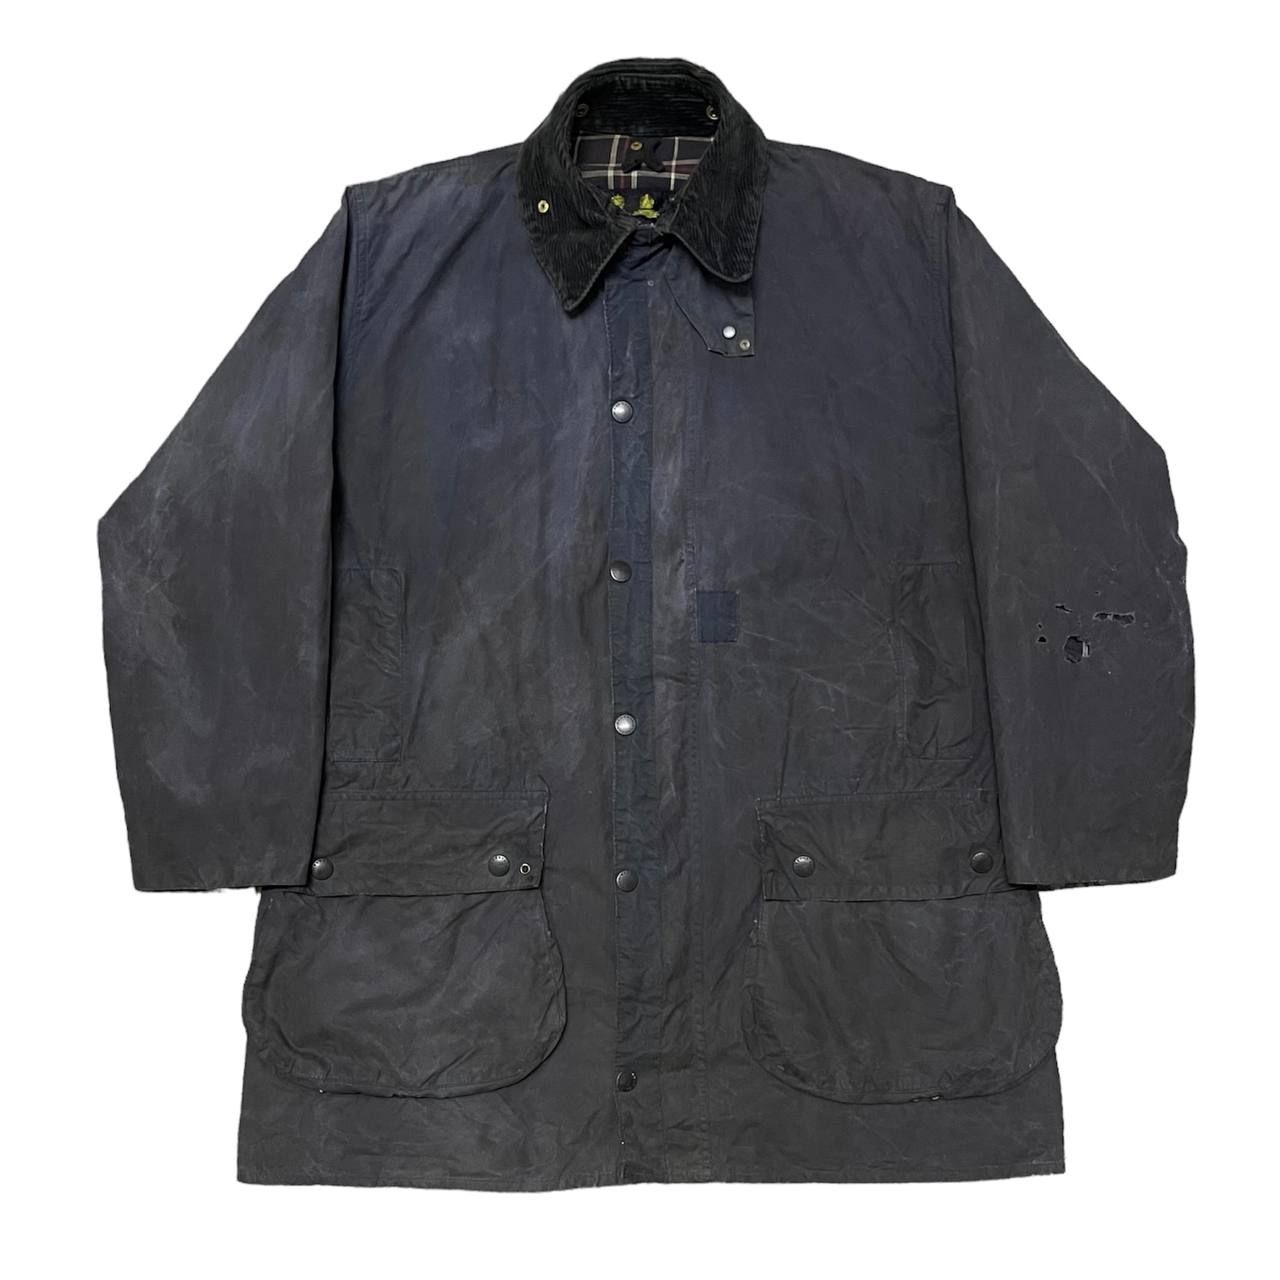 Vintage 90's Barbour Waxed Jacket A205 Border Distressed - 1